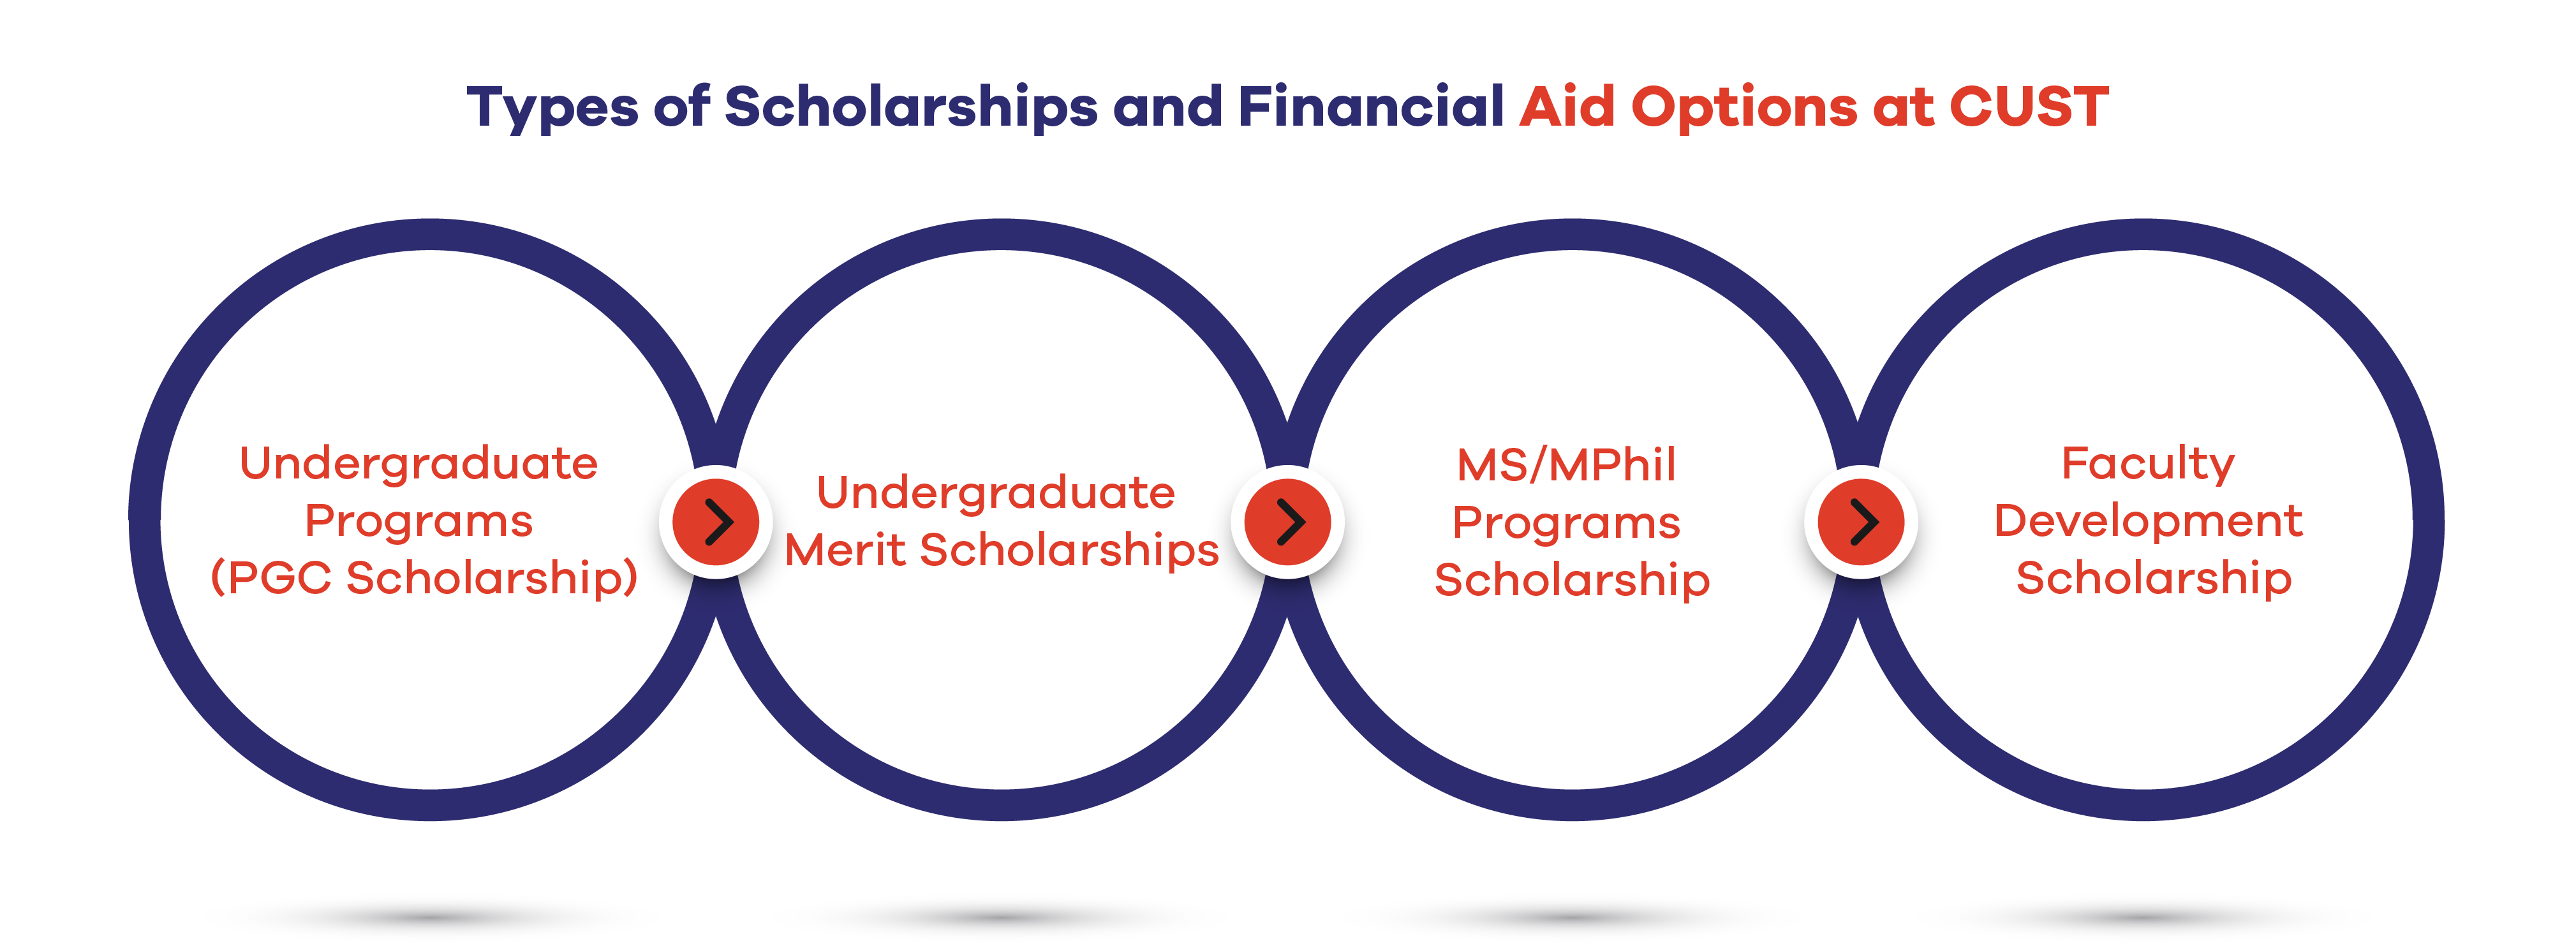 Types of Scholarships and Financial Aid Options at CUST 